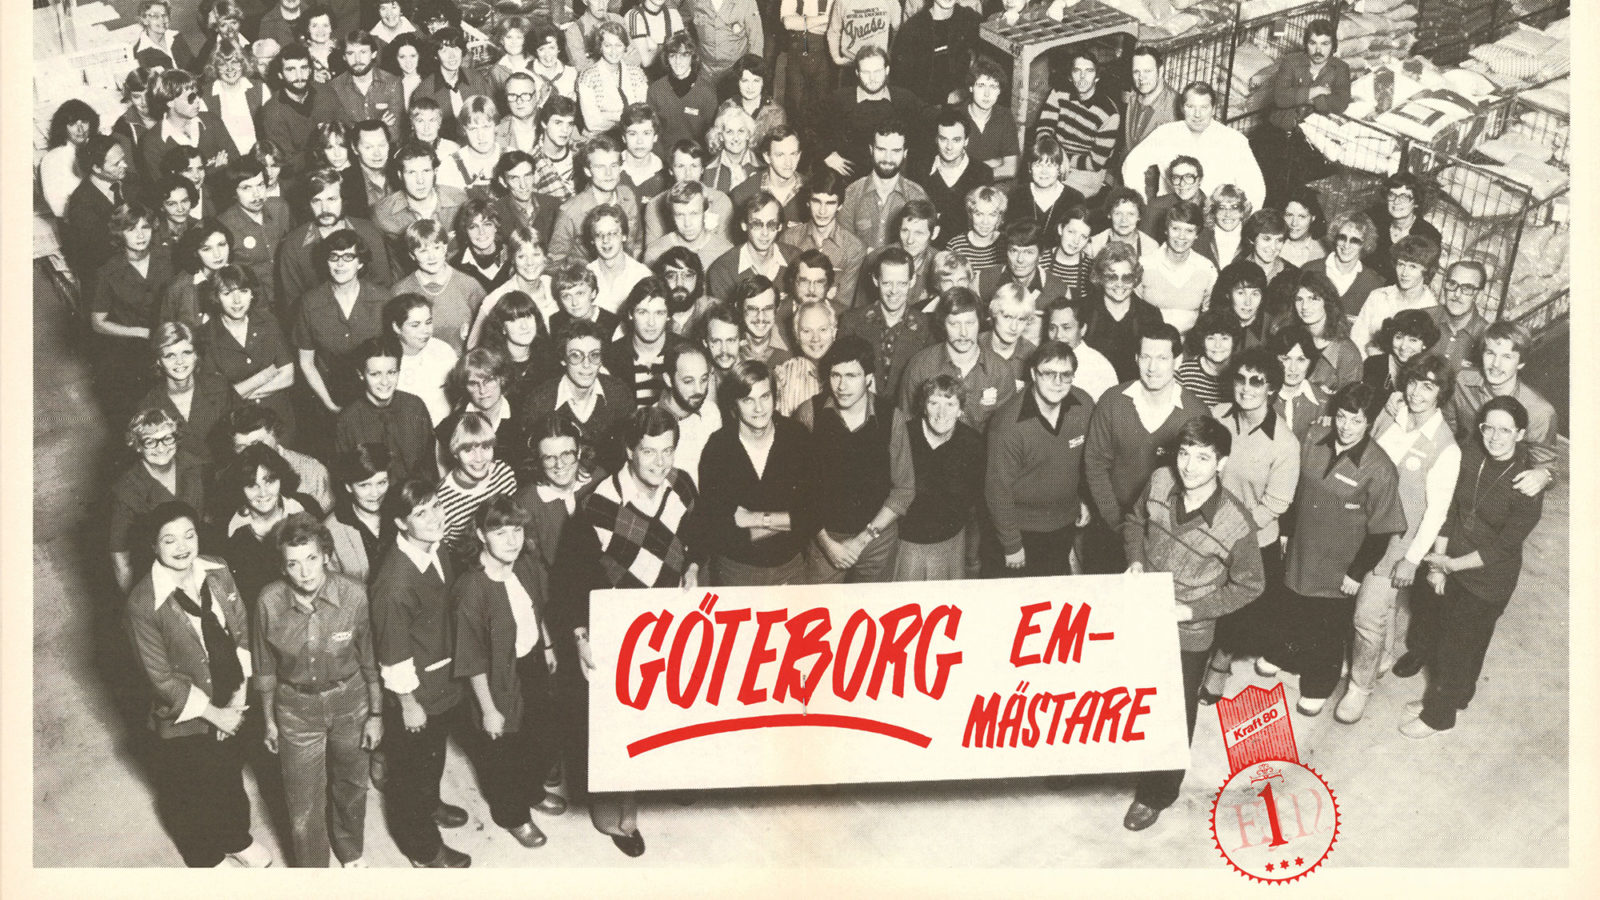 Group photo of large group of IKEA staff in 1980s clothing, behind banner saying Gothenburg, European champions.